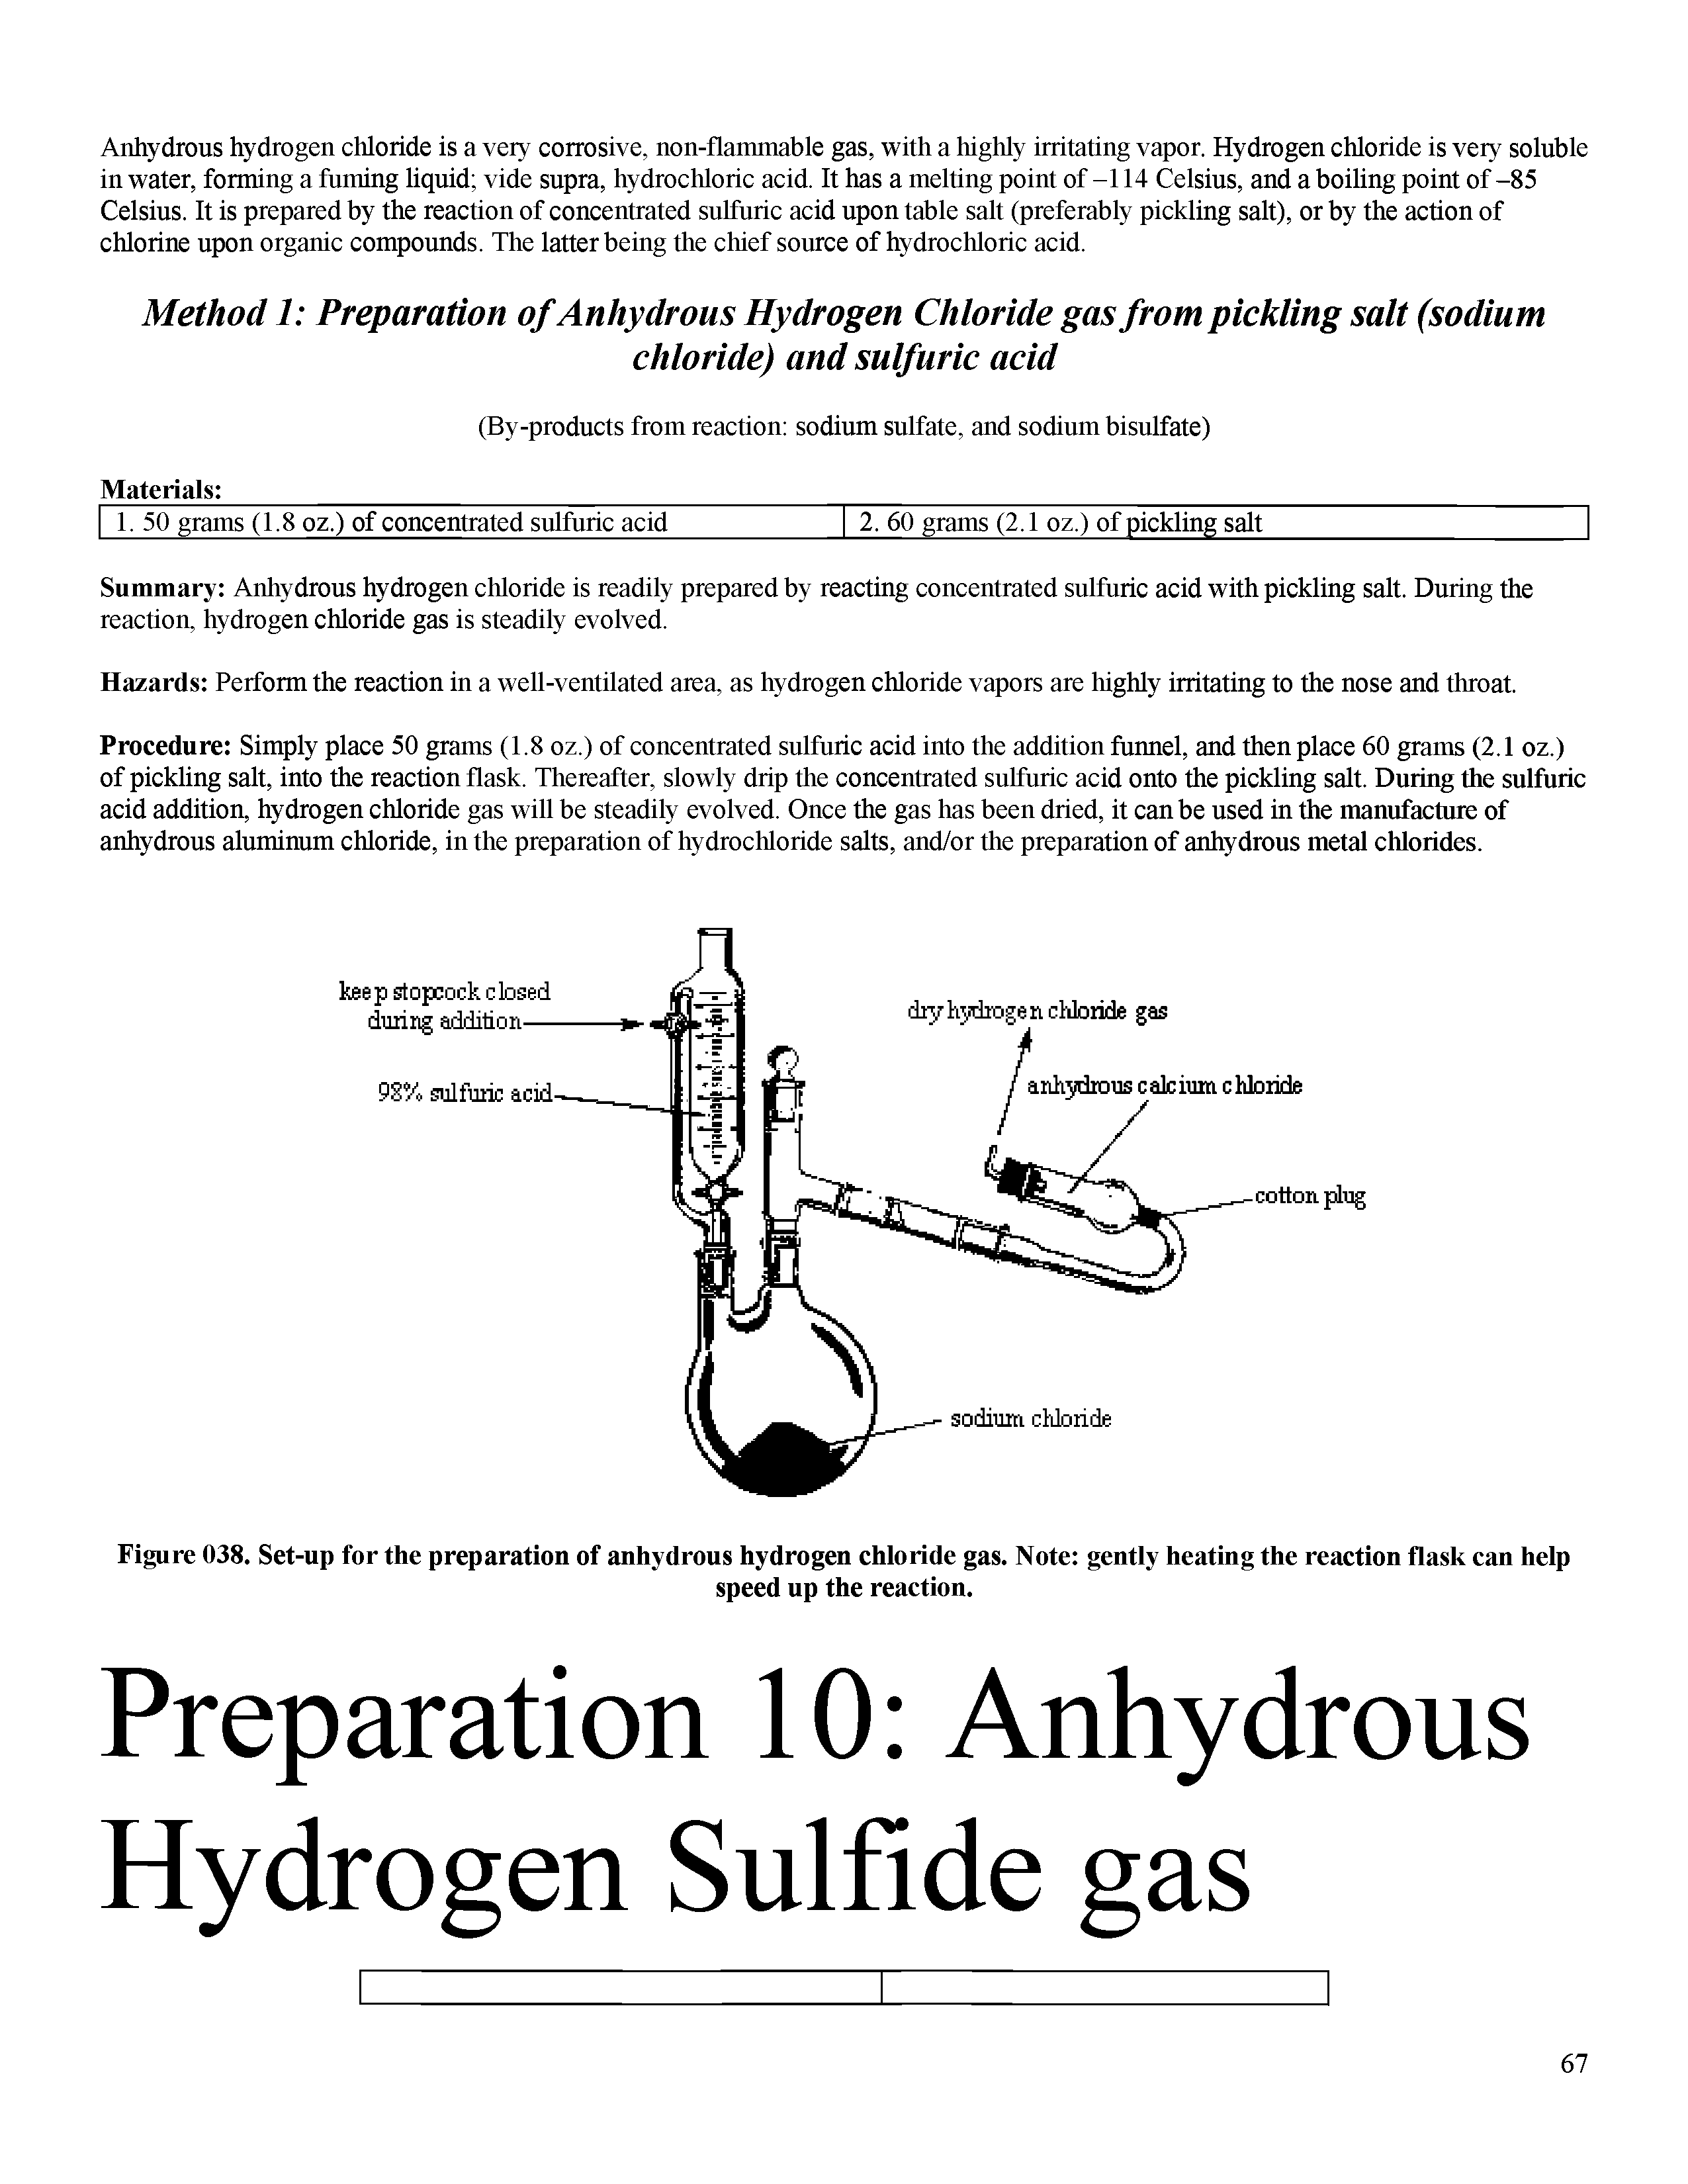 Figure 038. Set-up for the preparation of anhydrous hydrogen chloride gas. Note gently heating the reaction flask can help...